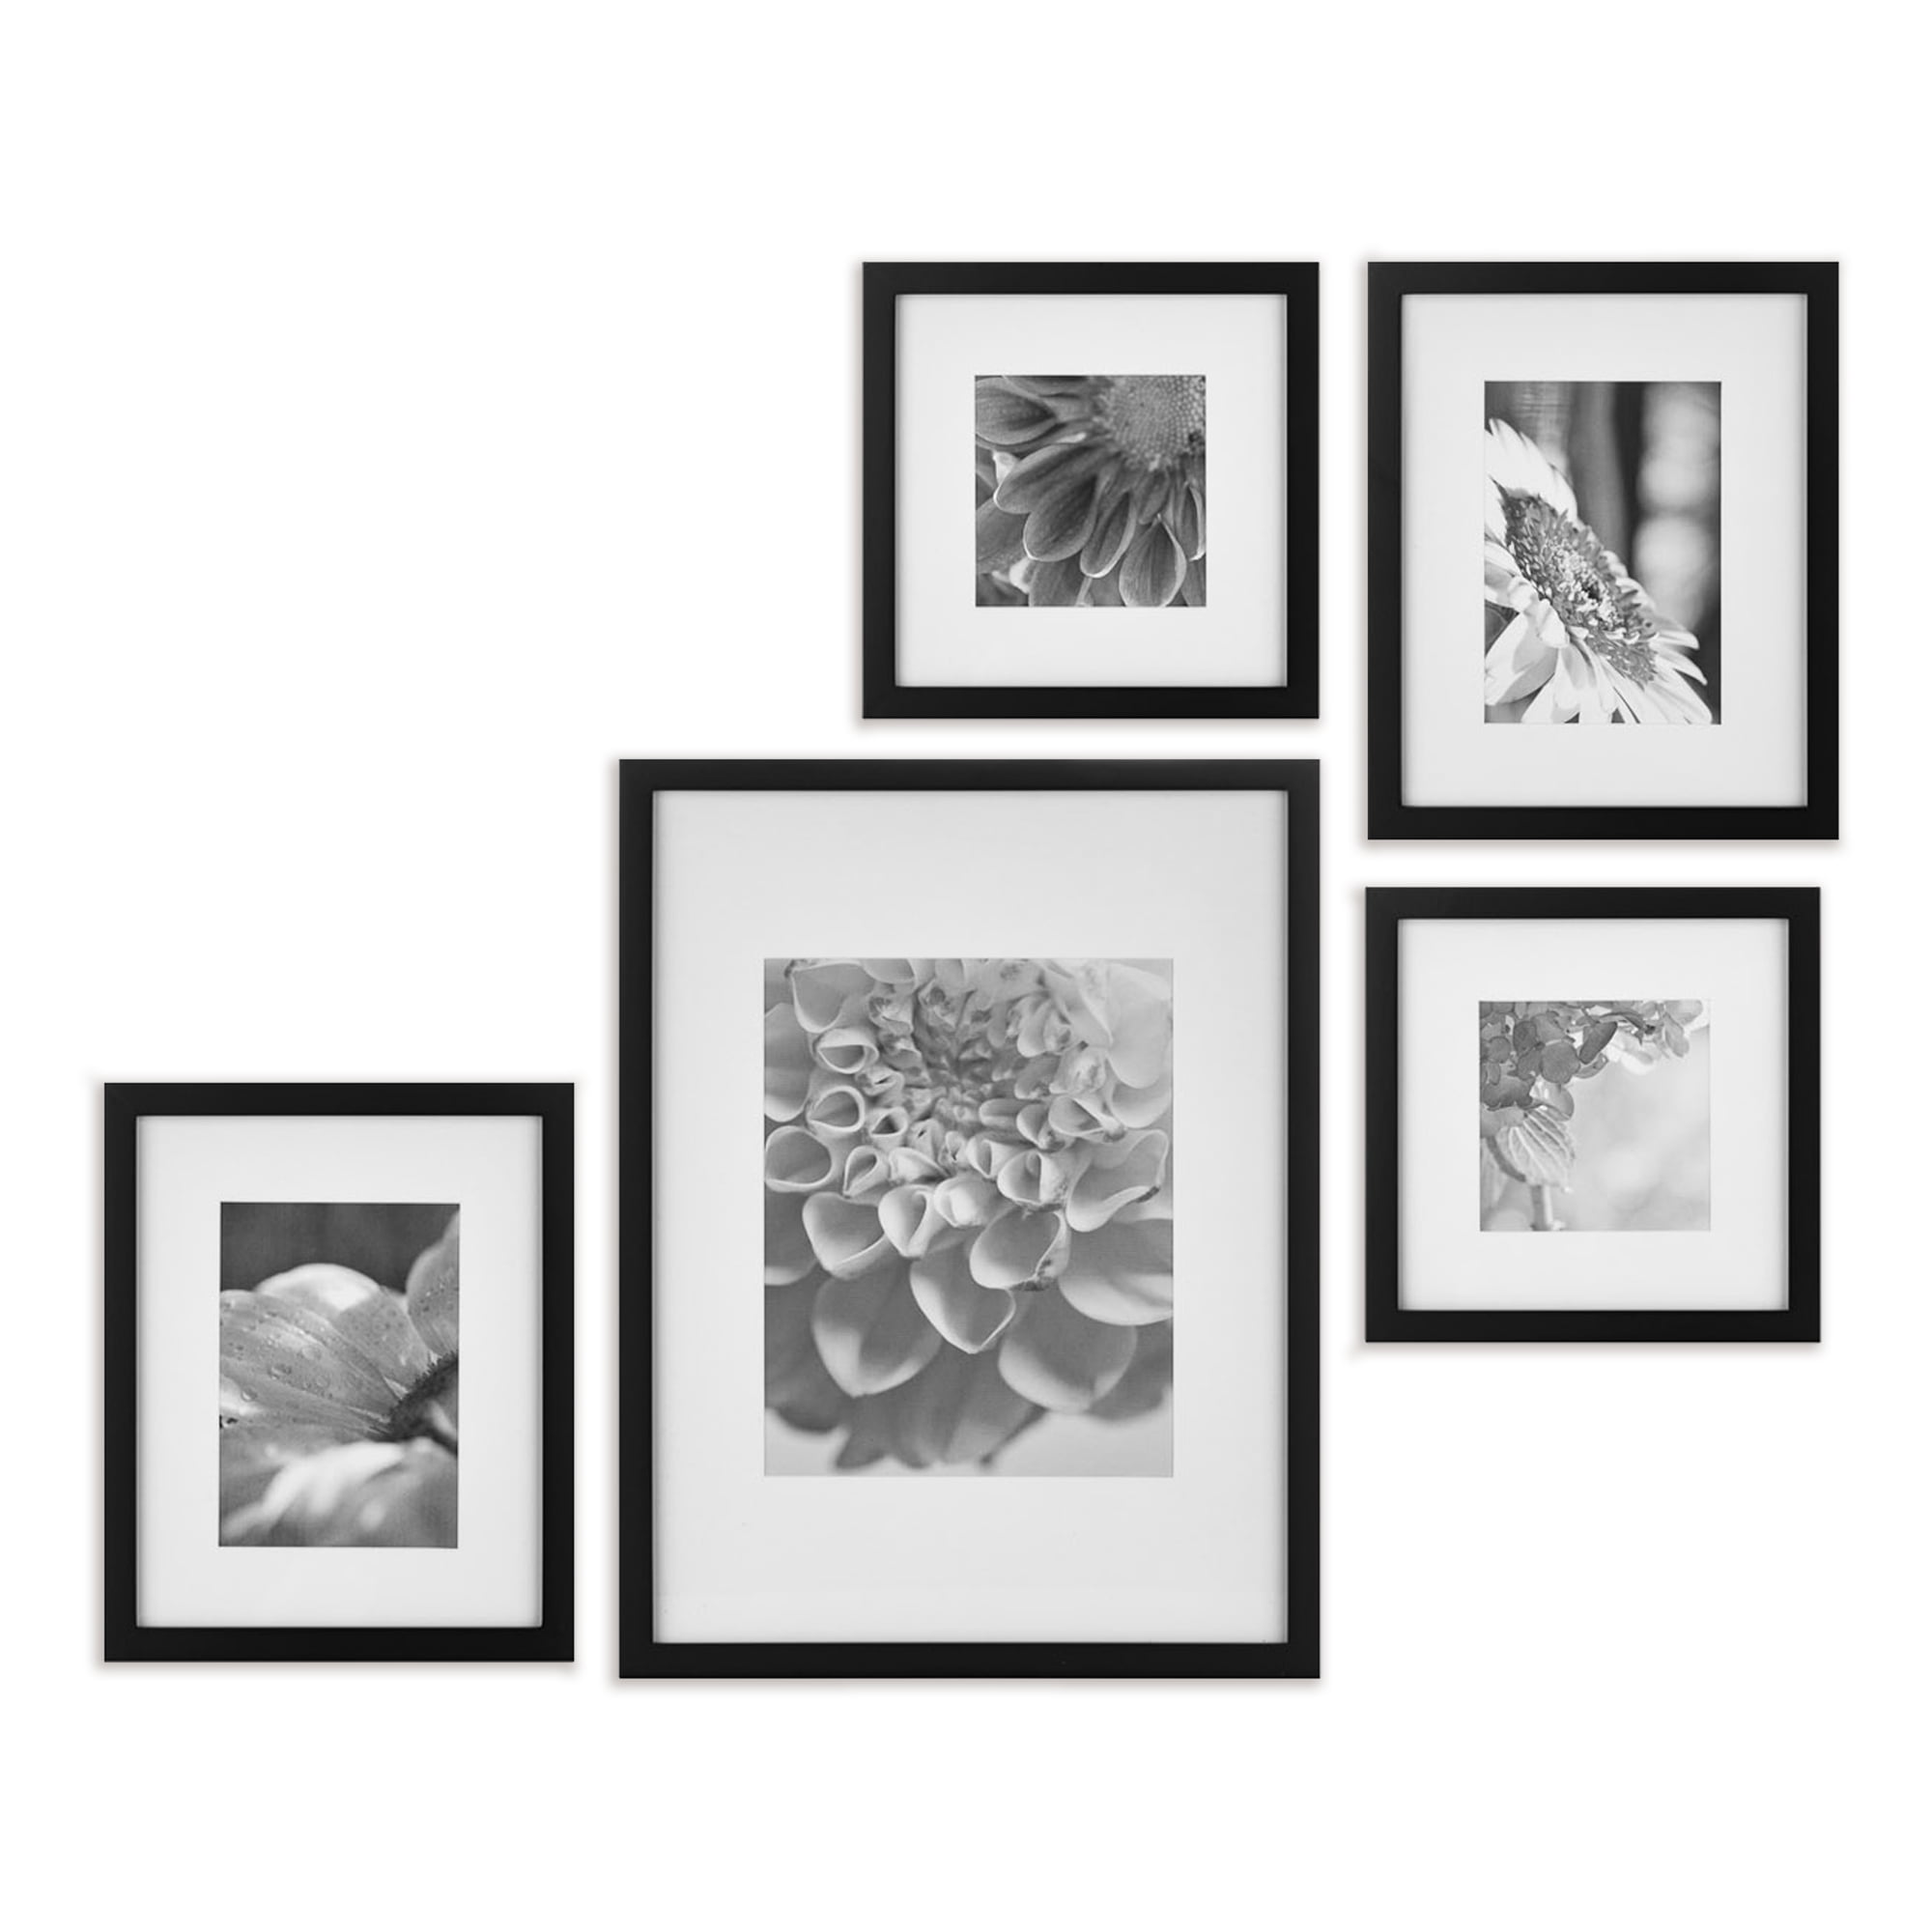 Icon Wood 4x6 Black Picture Frame + Reviews